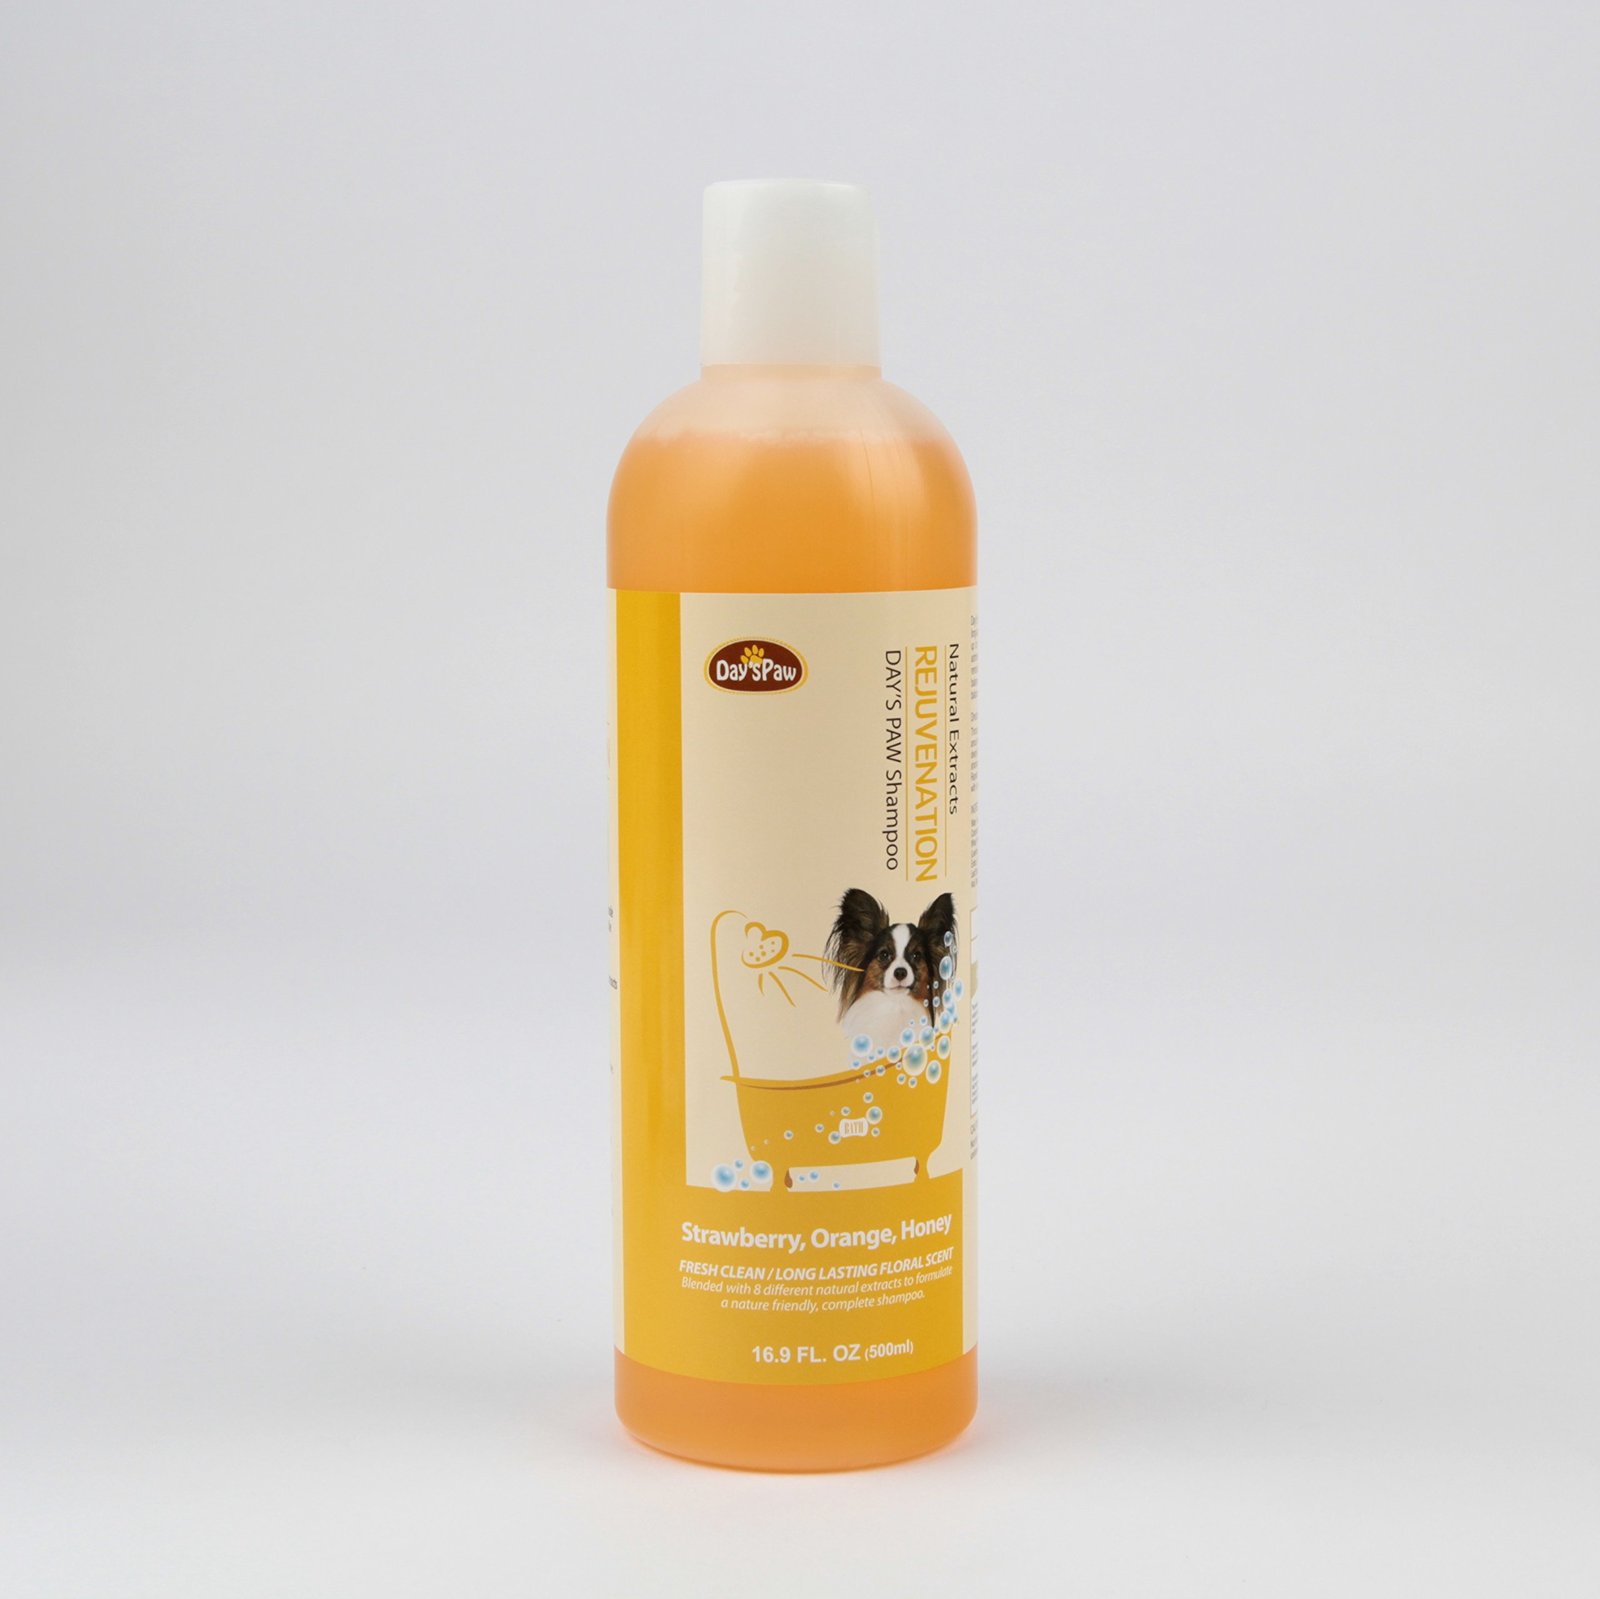 Primary image for Alpha Dog Series "Day's Paw" Shampoo - Buy Two Get One Conditioner Free (Rejuven